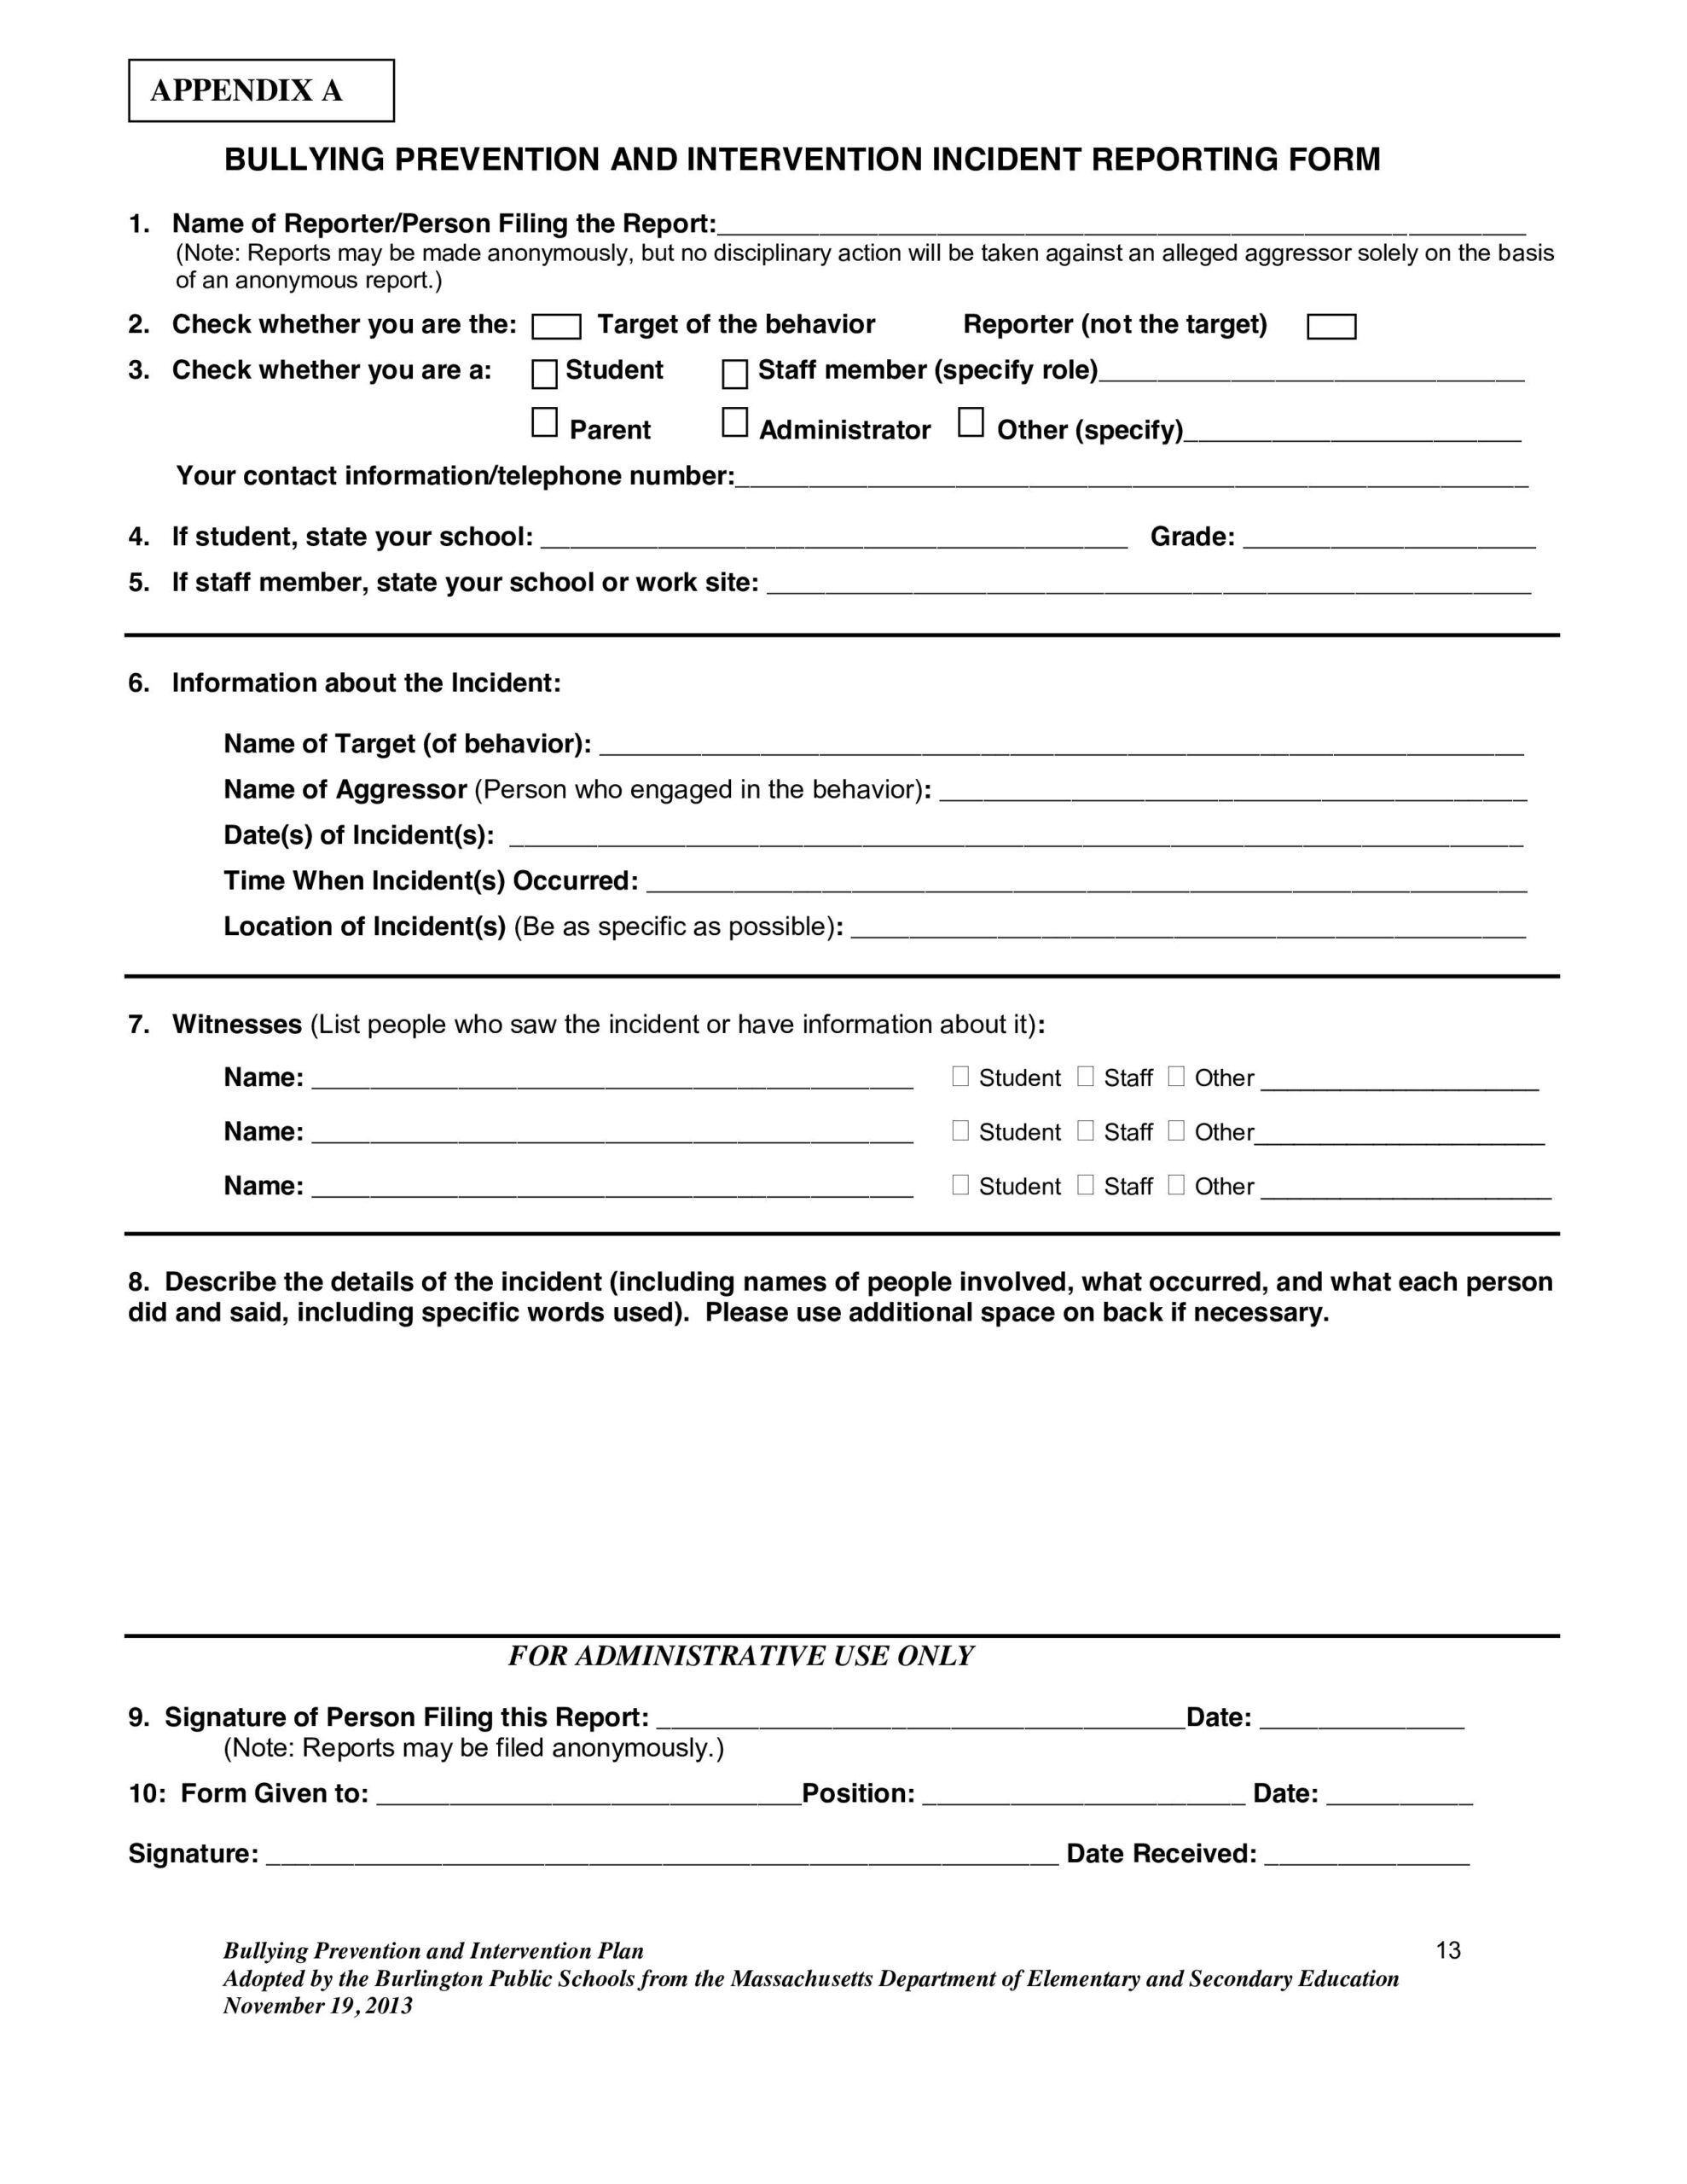 BPS Bullying Incident Report Form  Marshall Simonds Middle School Inside School Incident Report Template